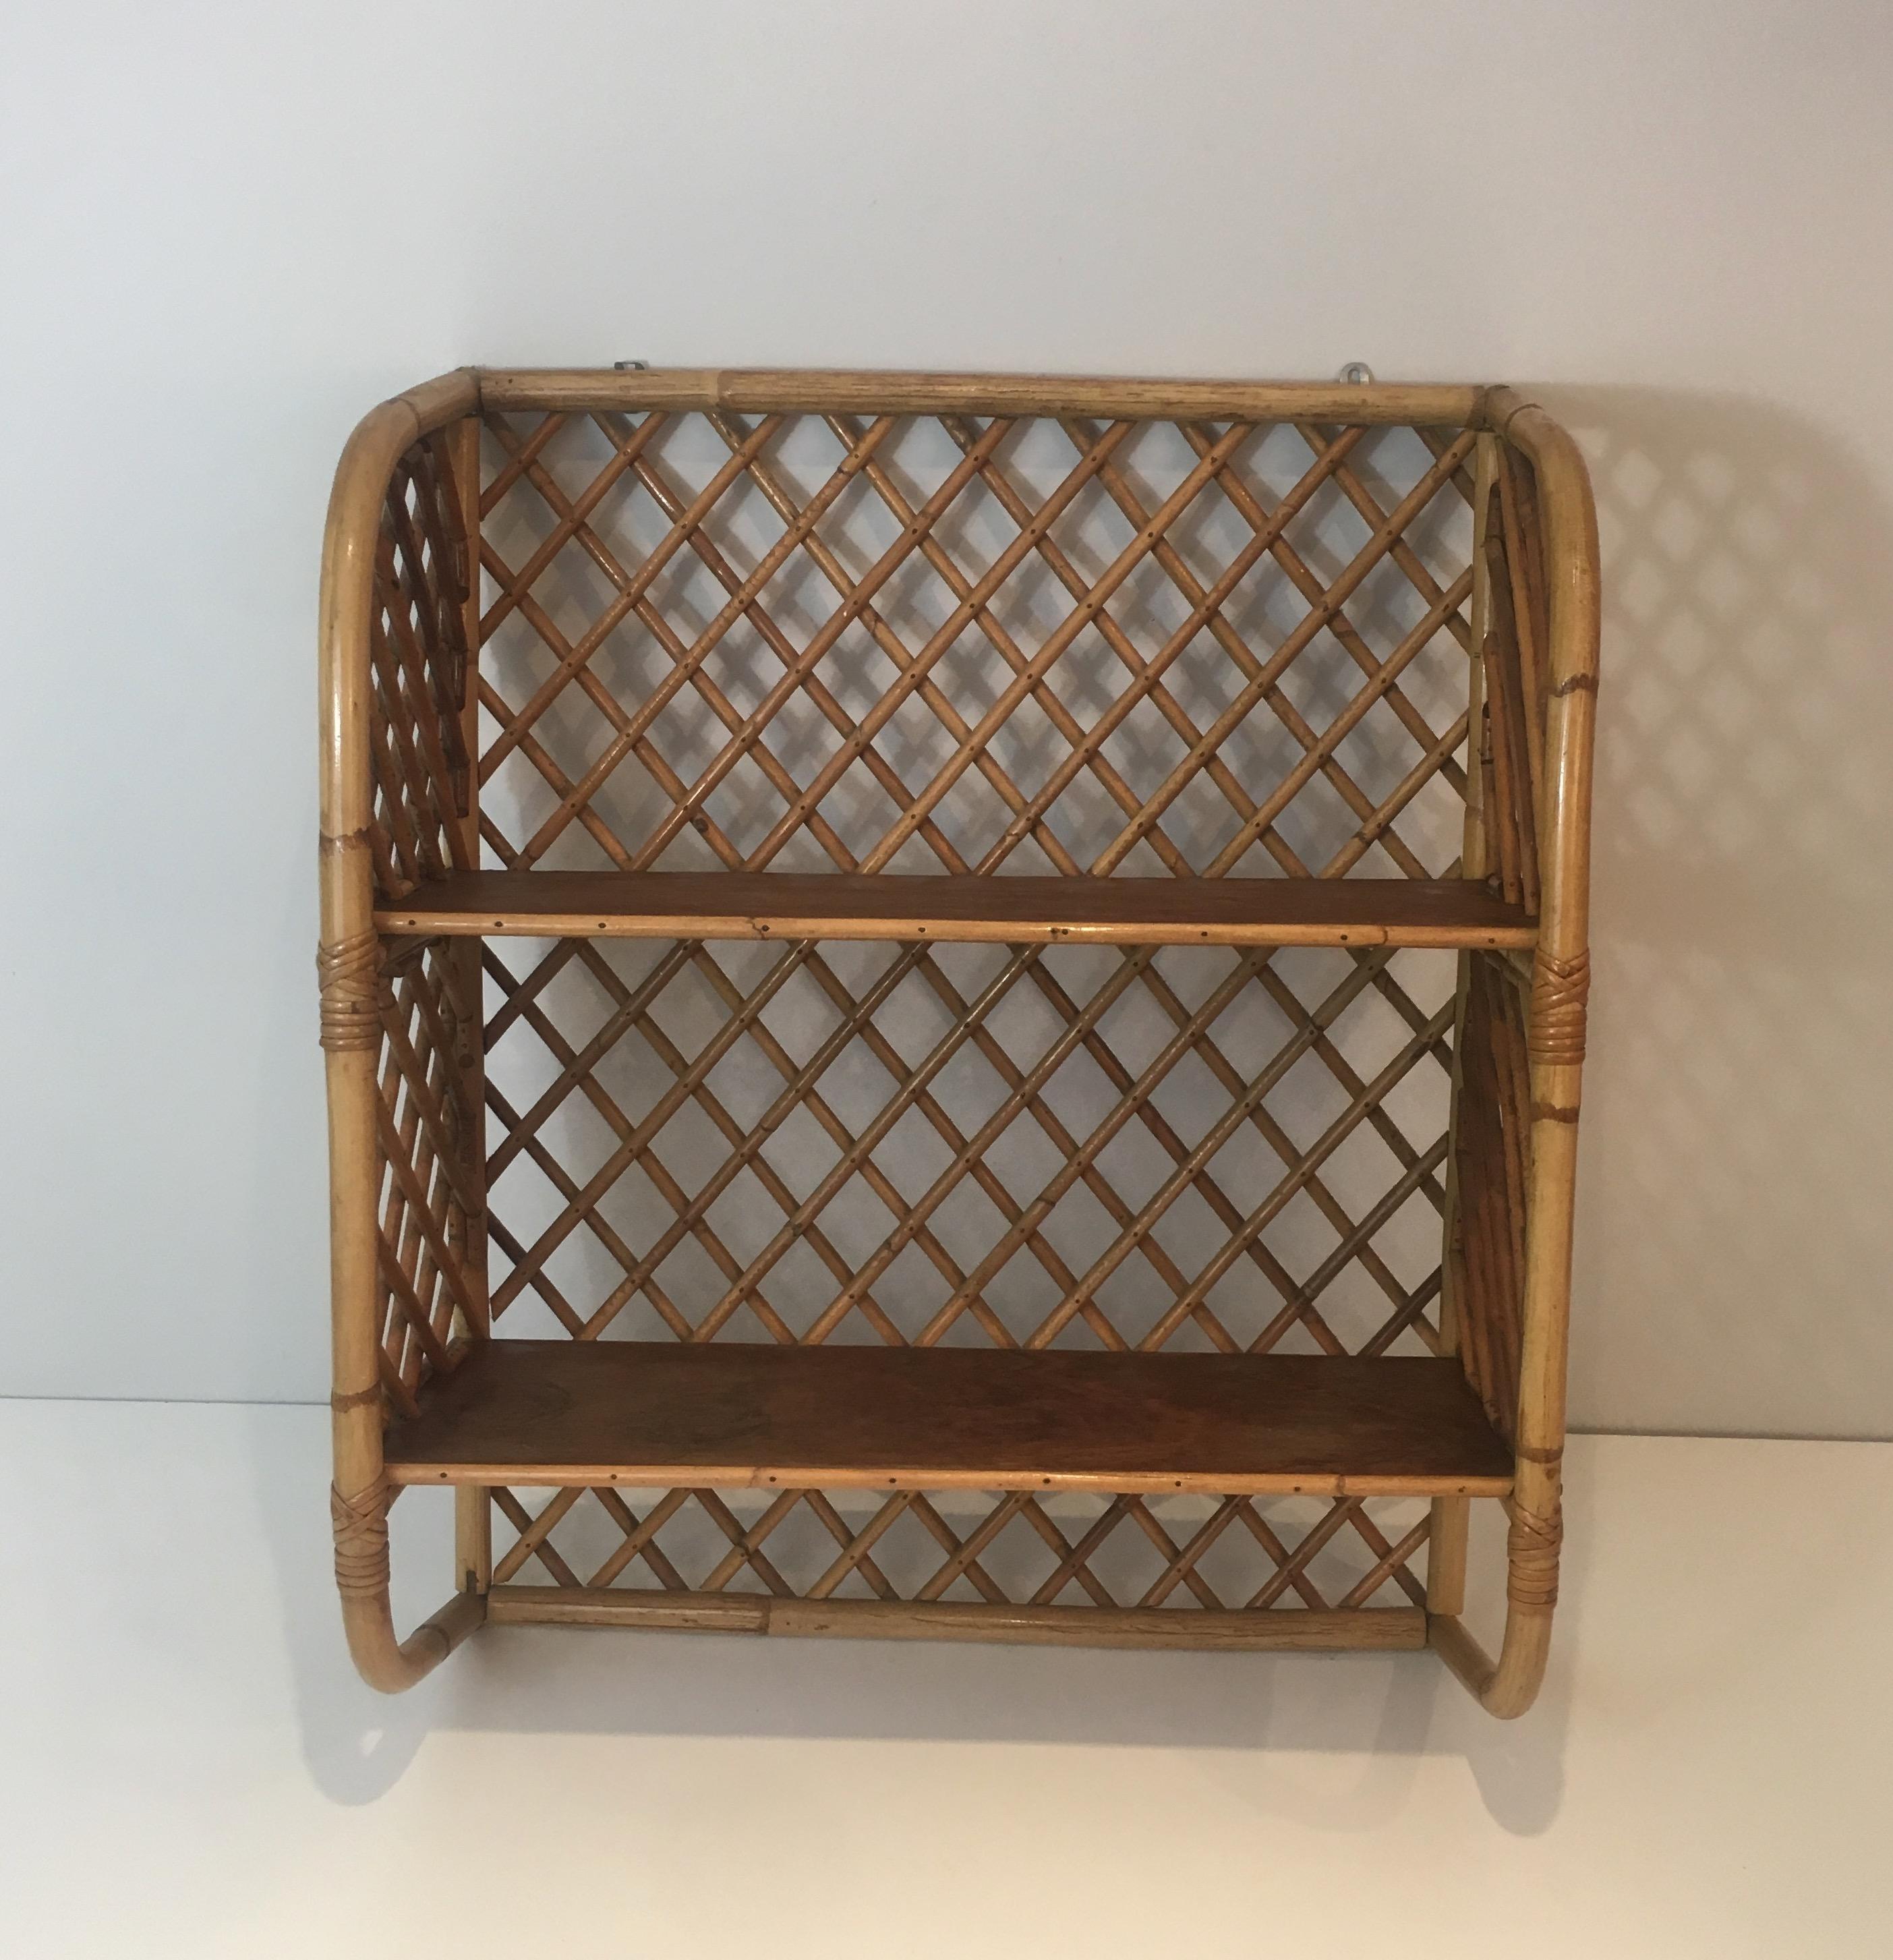 Mid-Century Modern Attributed to Audoux Minet, Rattan and Wood Wall Shelves, French, circa 1950 For Sale